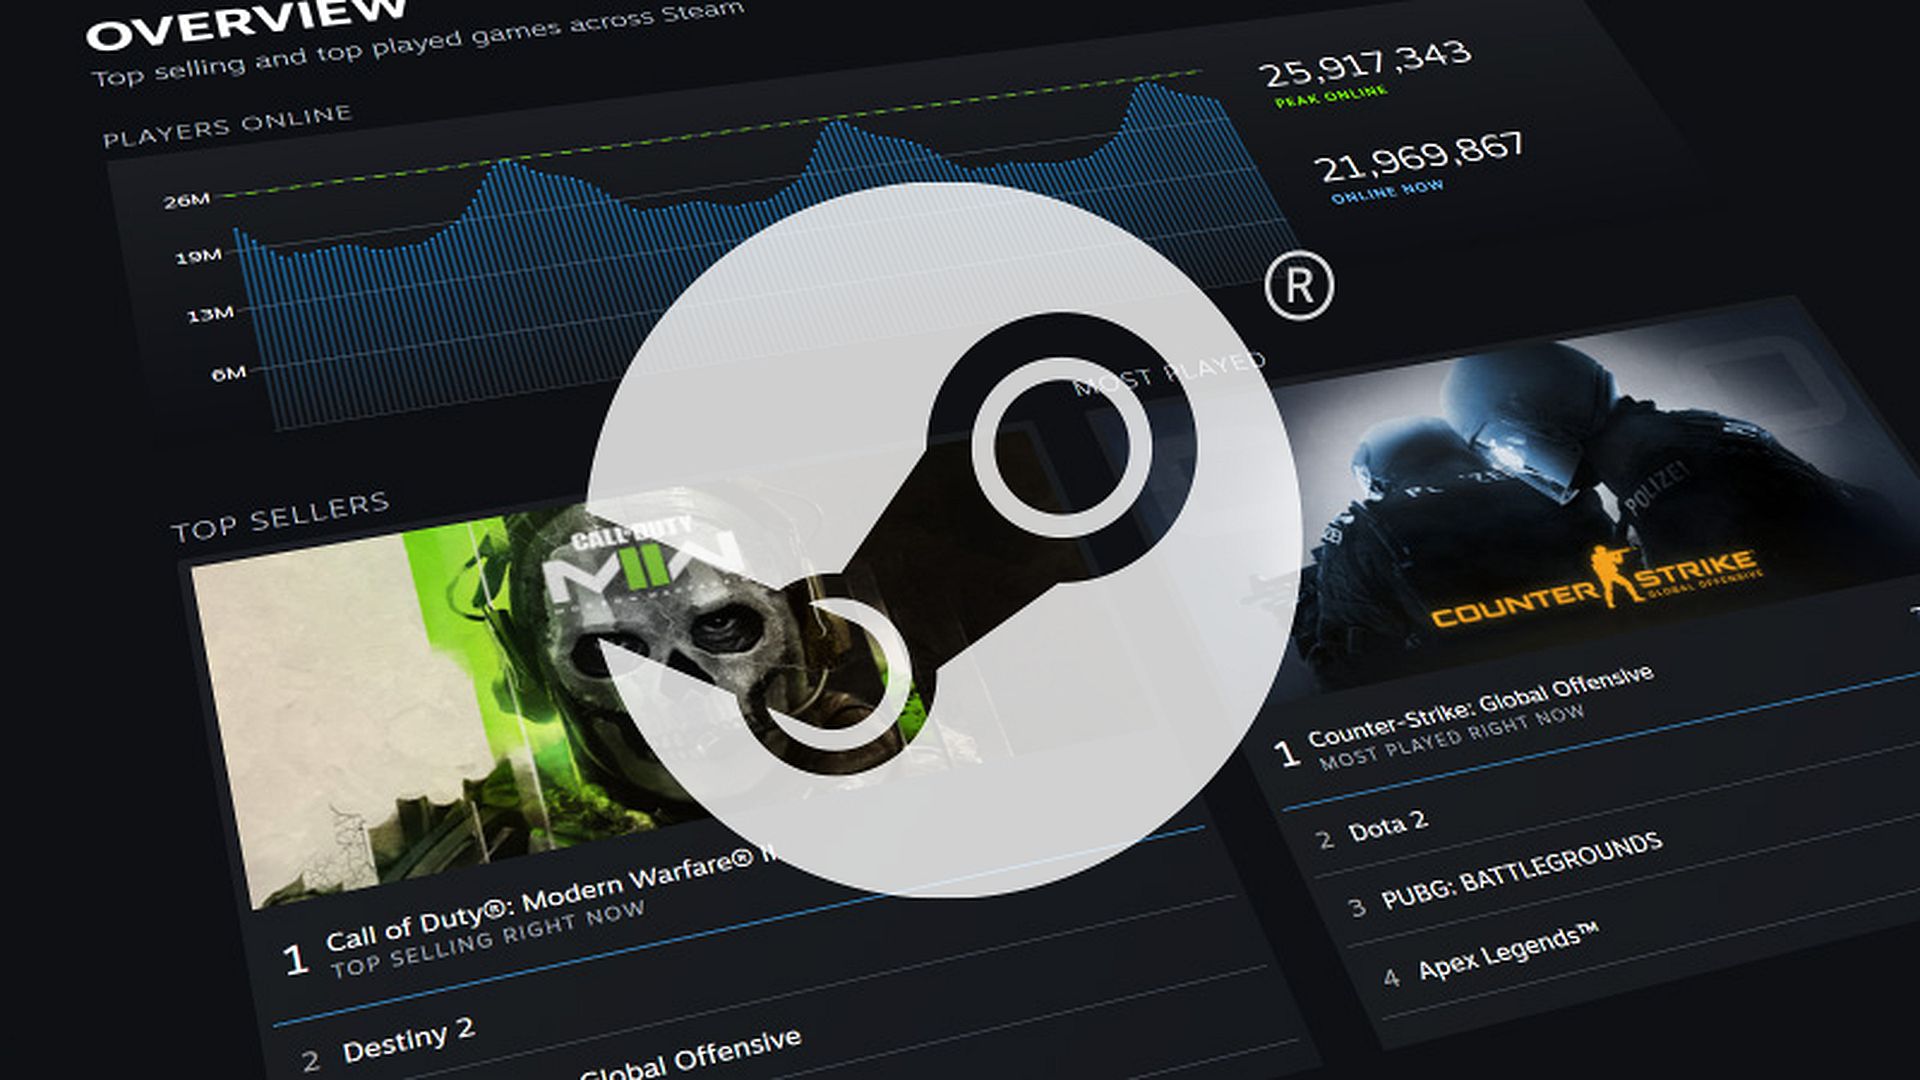 Steam Private Games: A safe for your darkest gaming habits